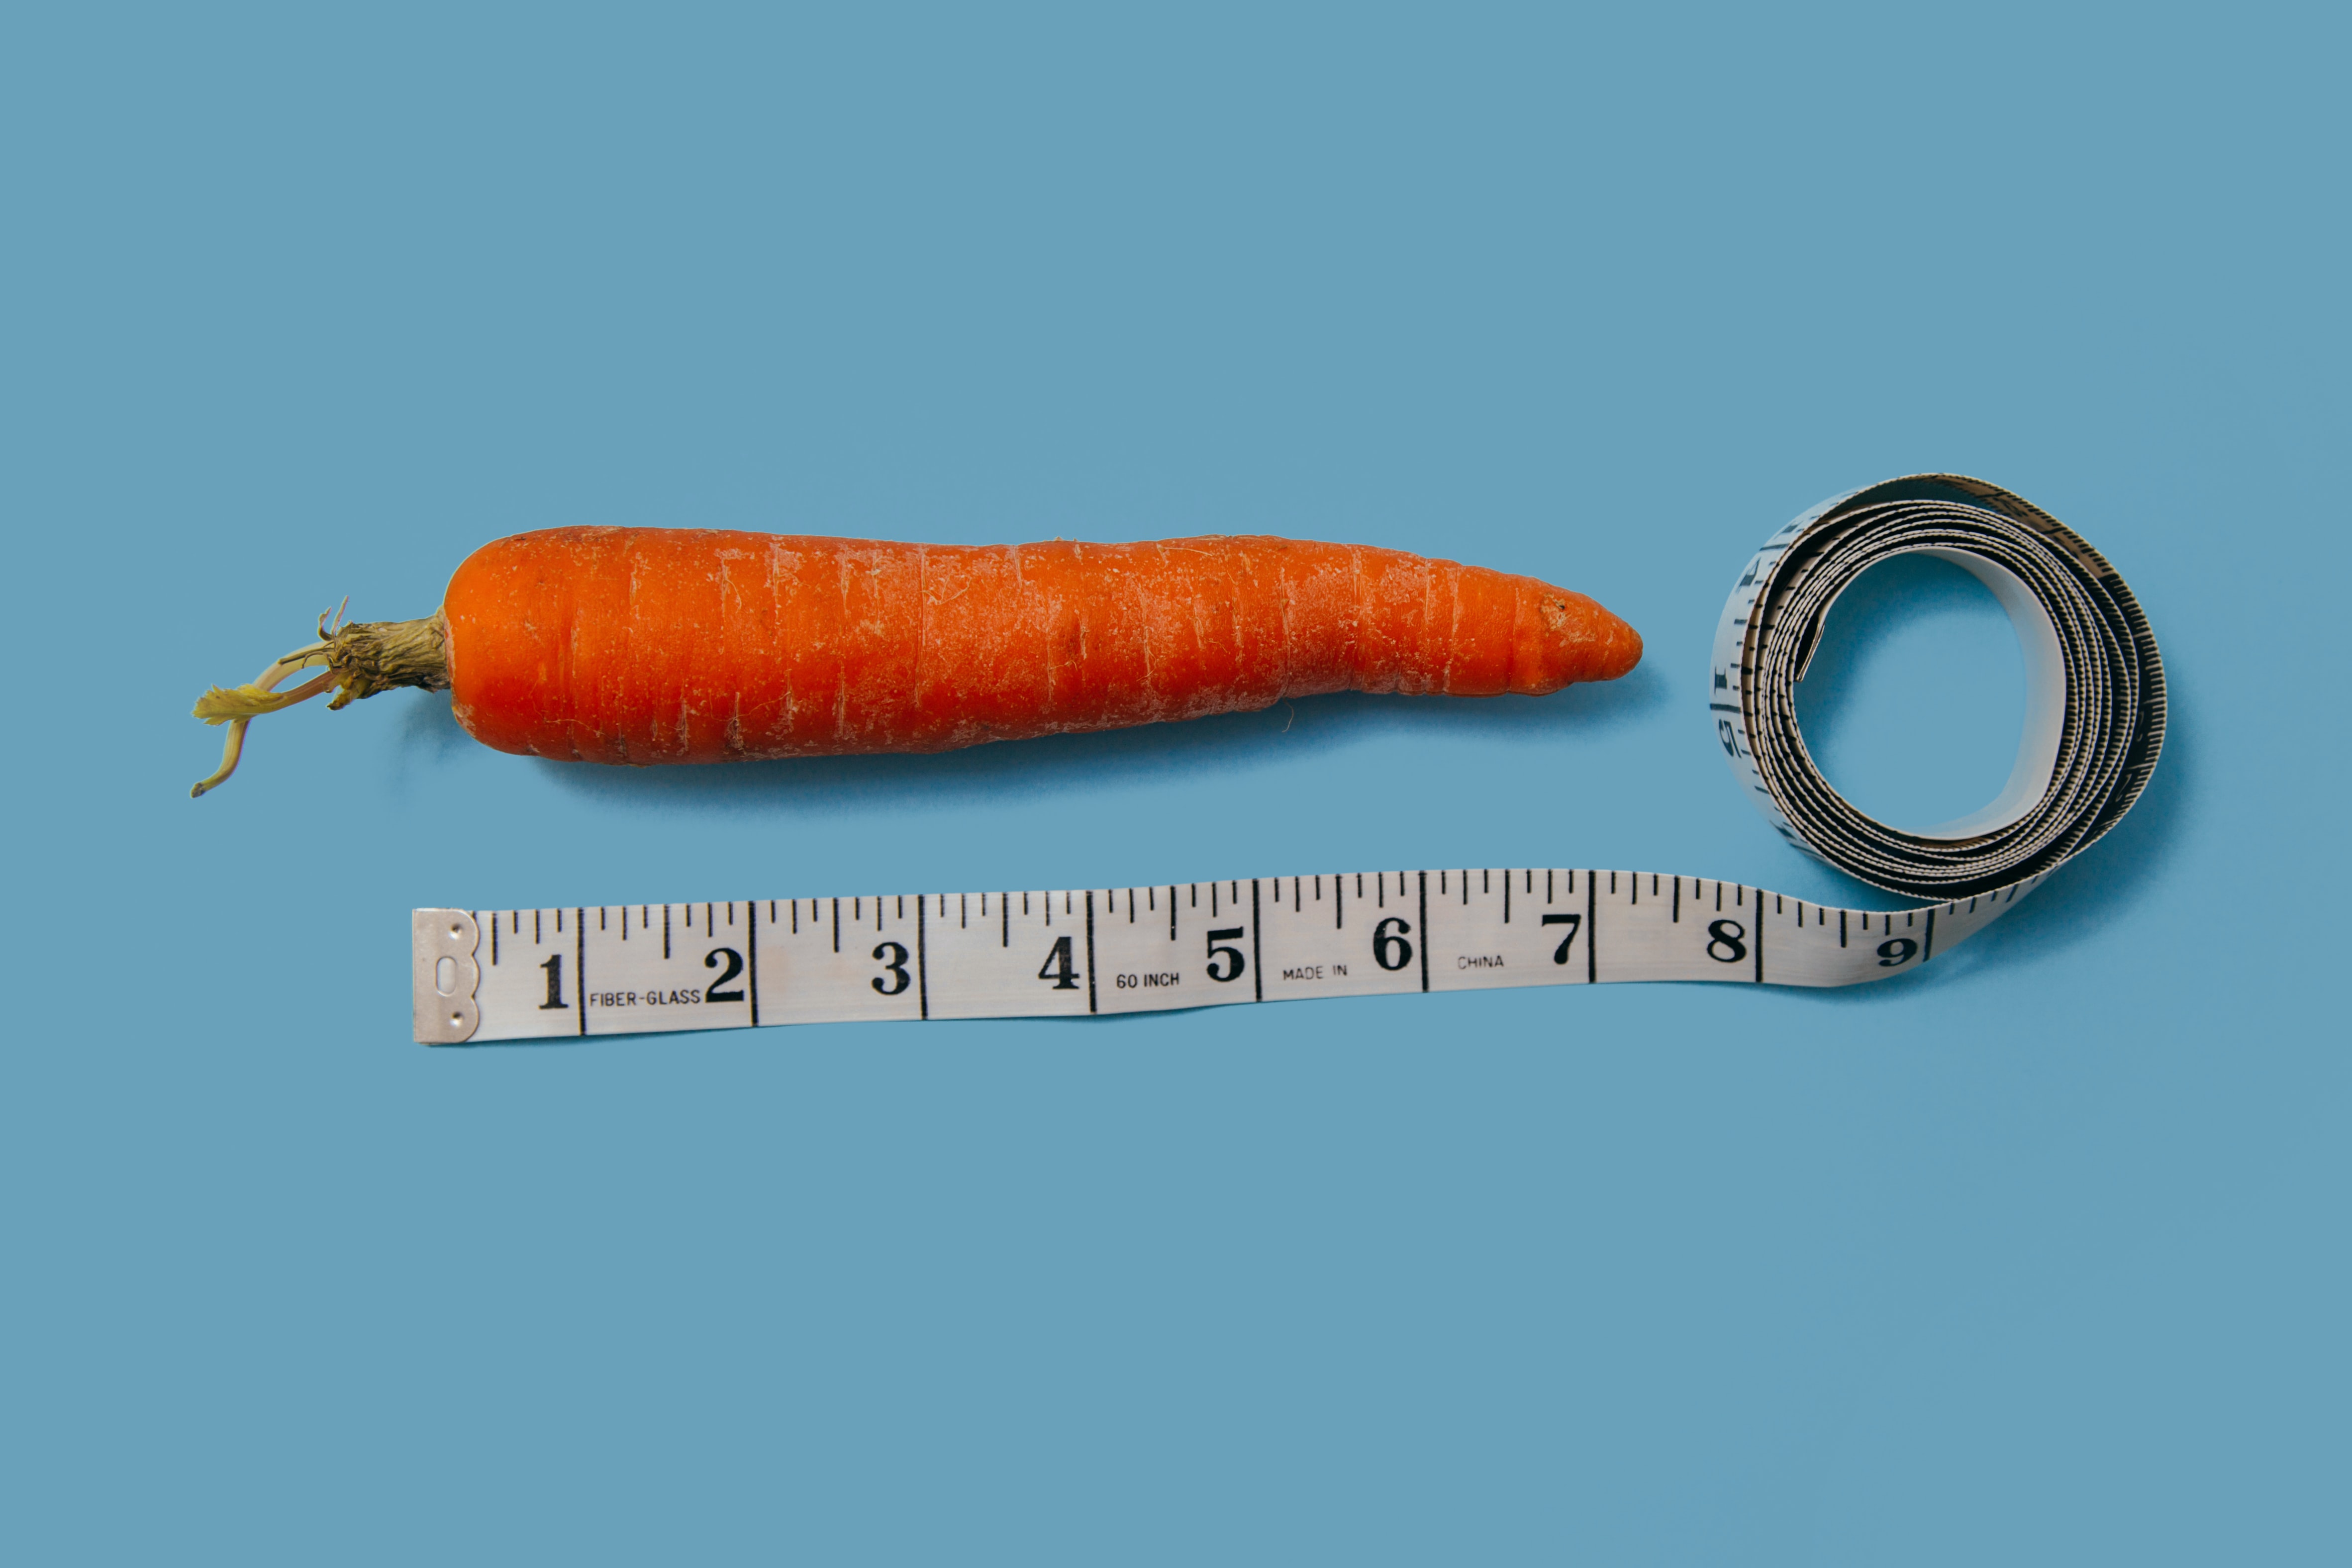 image shows a carrot with a tape measure alongside it